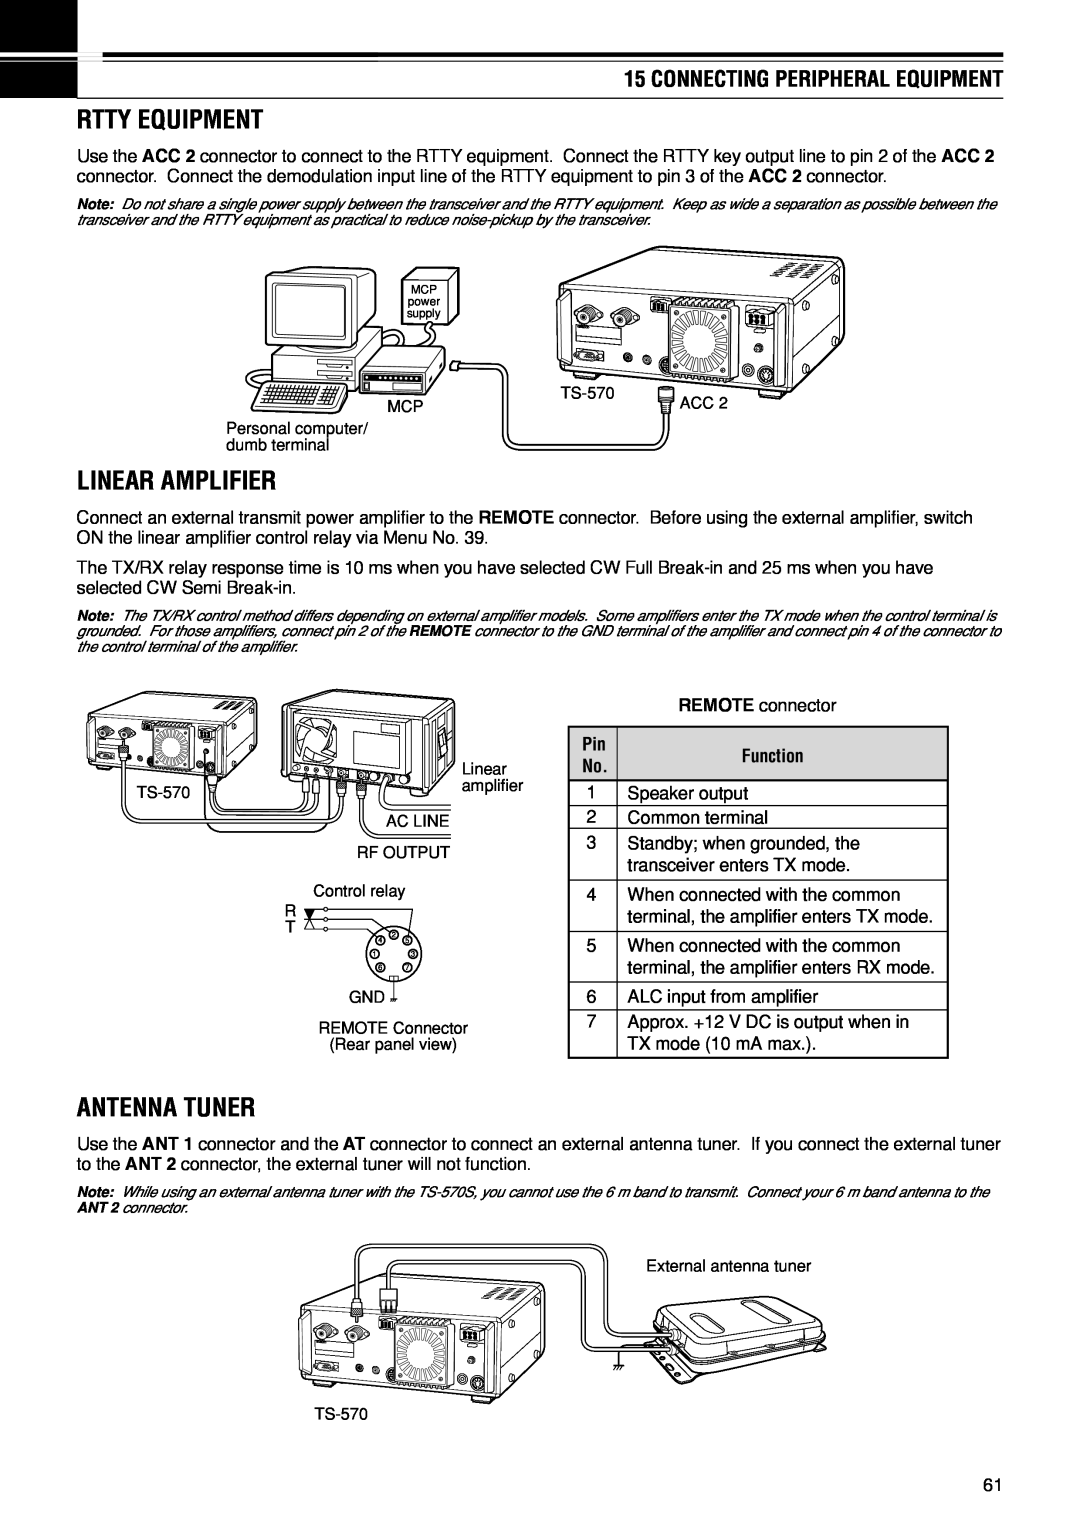 Kenwood TS-570D instruction manual Rtty Equipment, Linear Amplifier, Antenna Tuner, Connecting Peripheral Equipment 